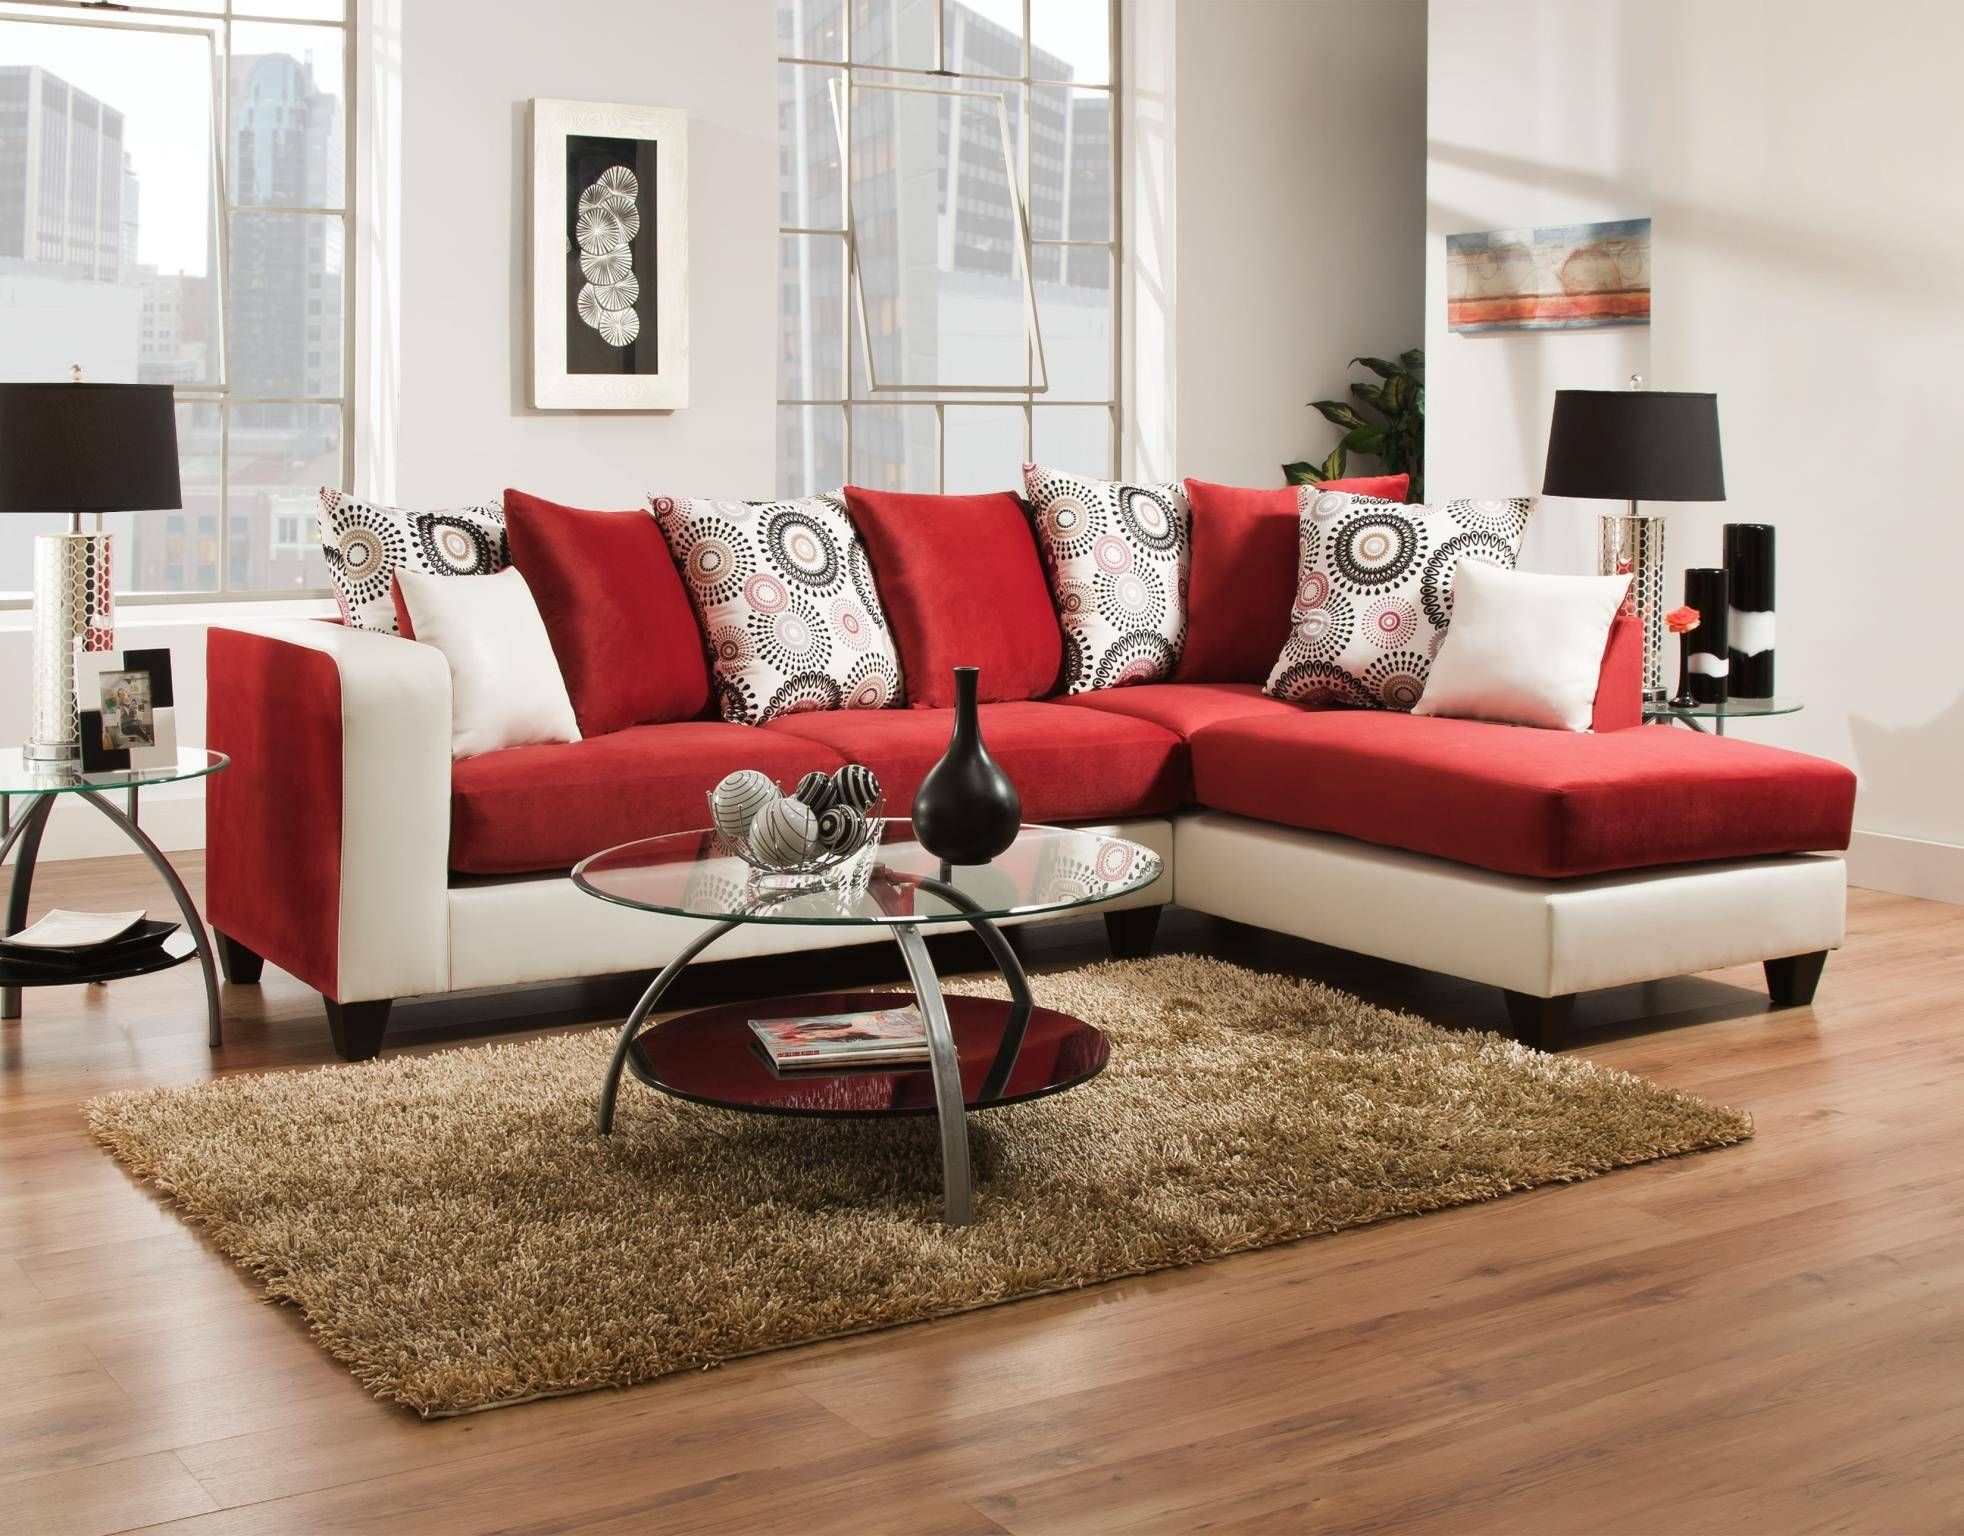 New Sectional Sofas Tampa 14 In 10 Foot Sectional Sofa With Intended For 10 Foot Sectional Sofa (Photo 131 of 299)